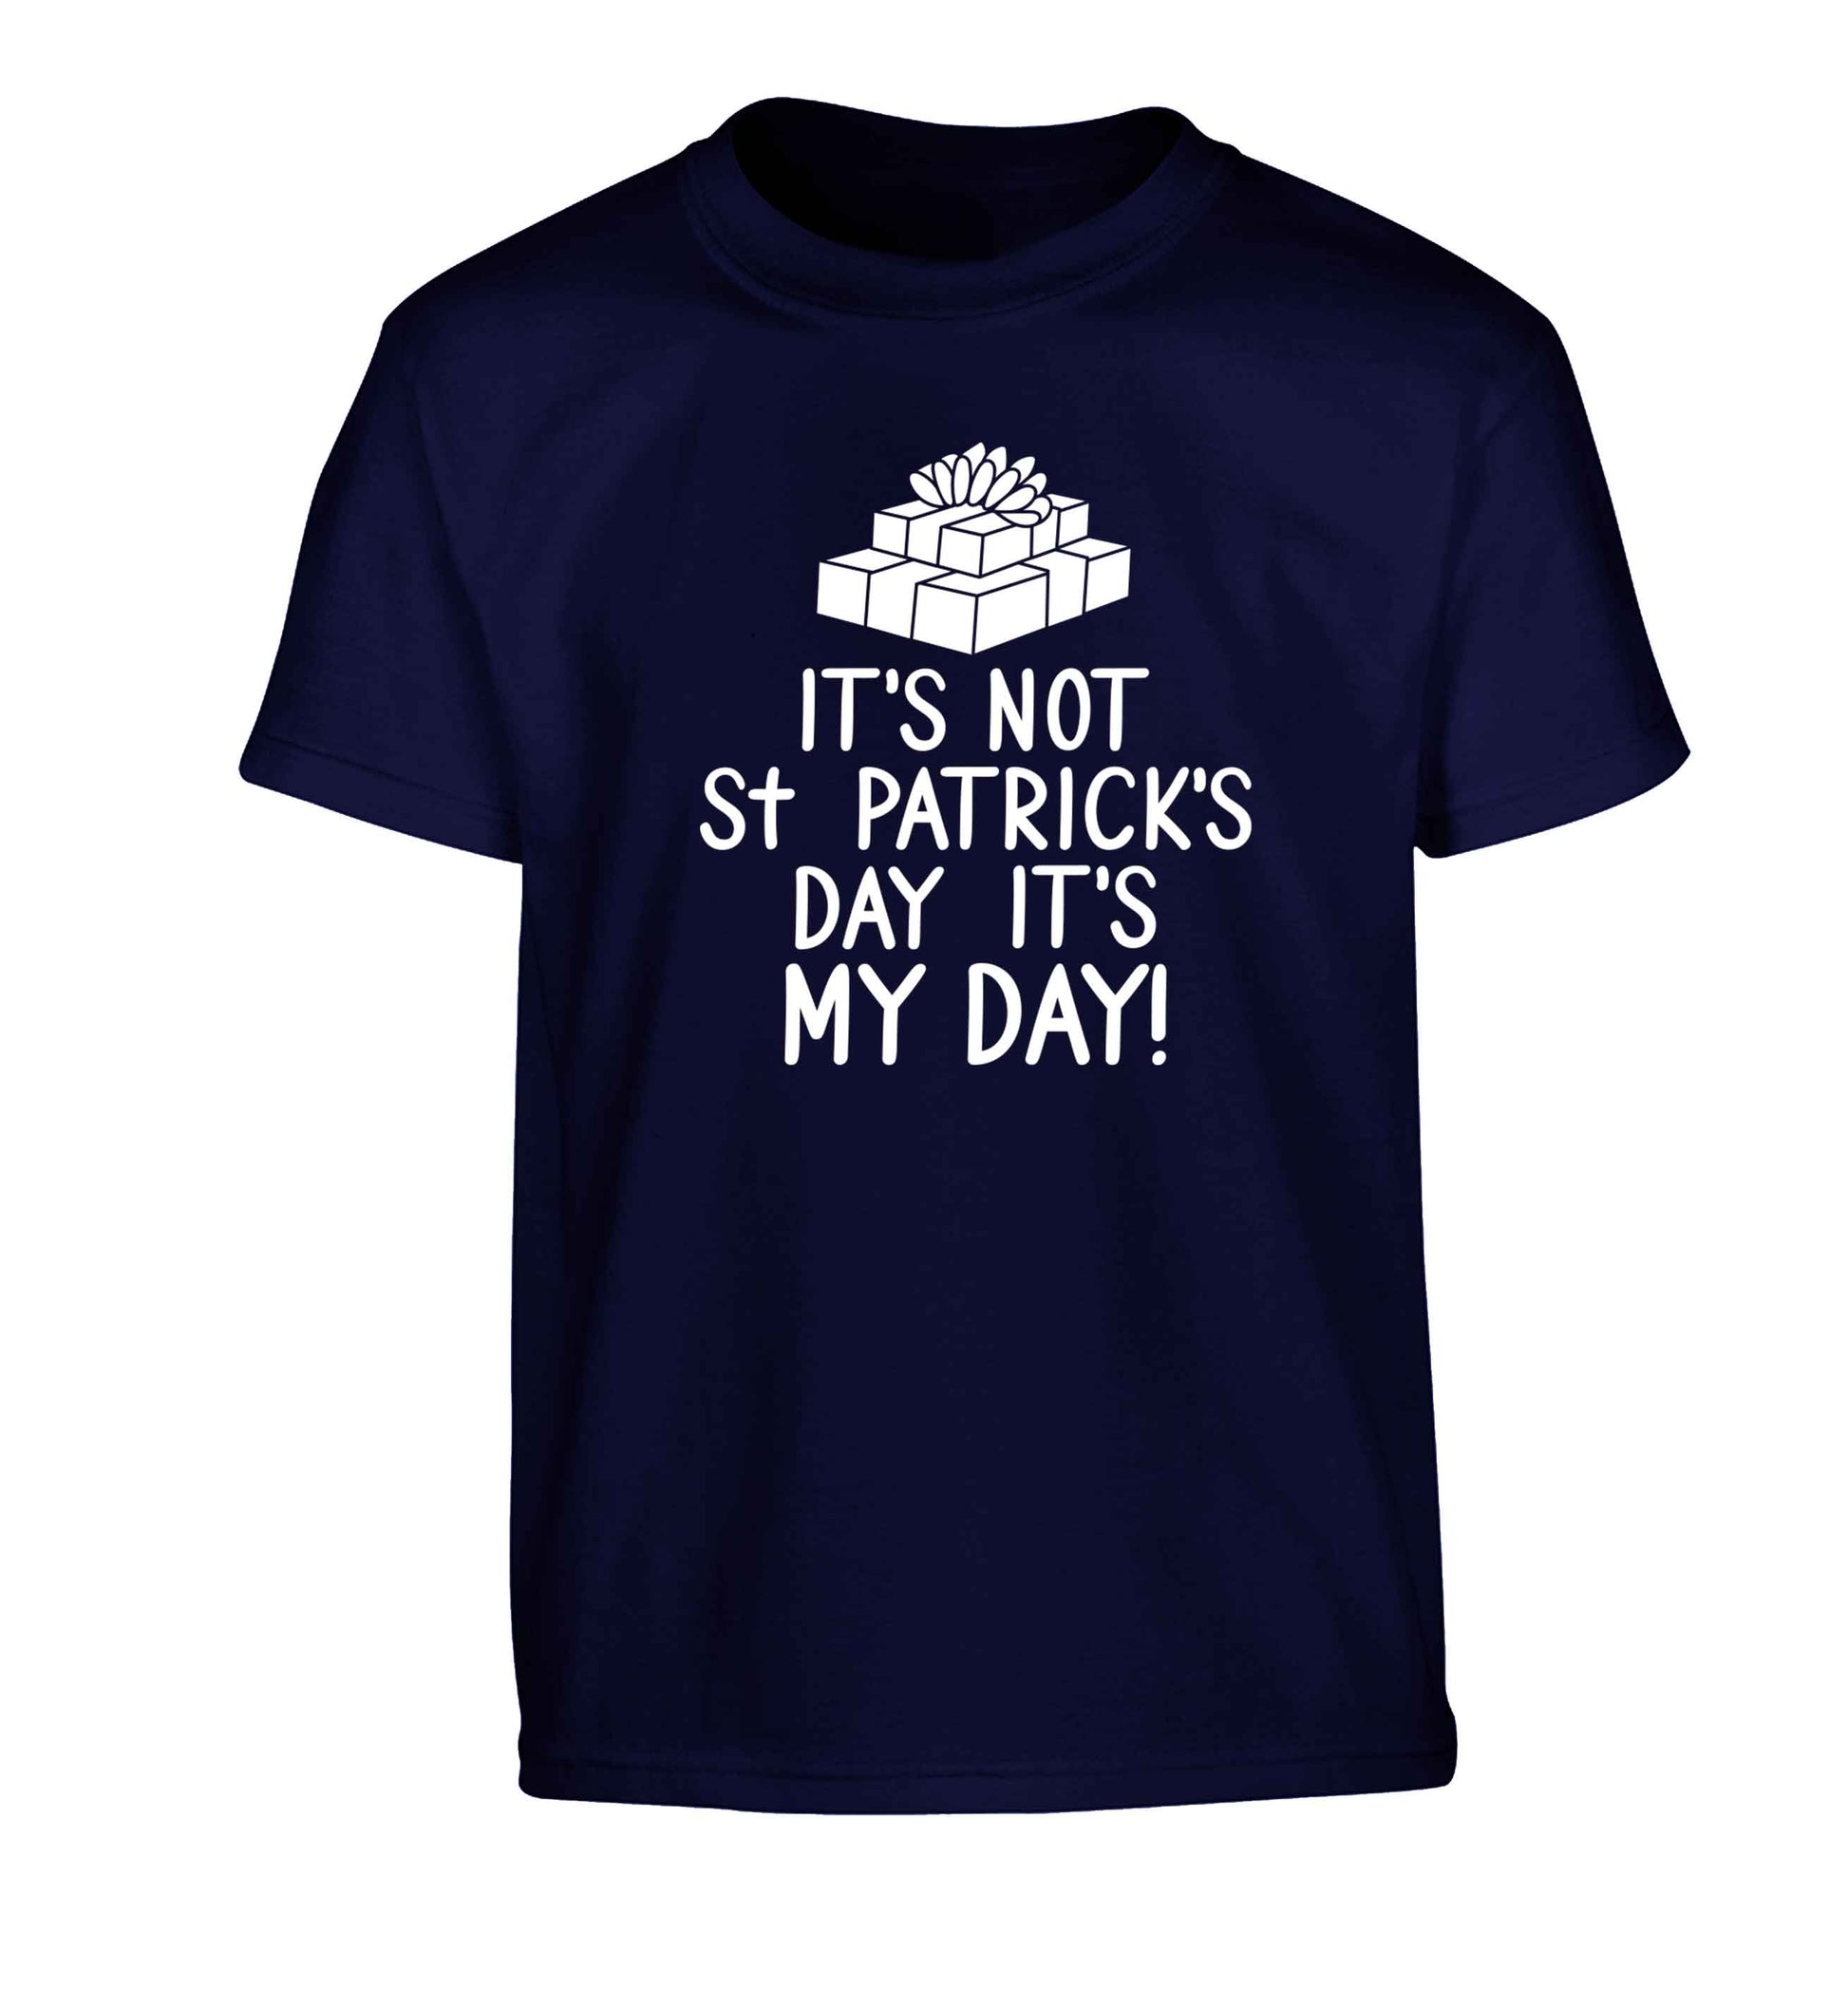 Funny gifts for your mum on mother's dayor her birthday! It's not St Patricks day it's my day Children's navy Tshirt 12-13 Years